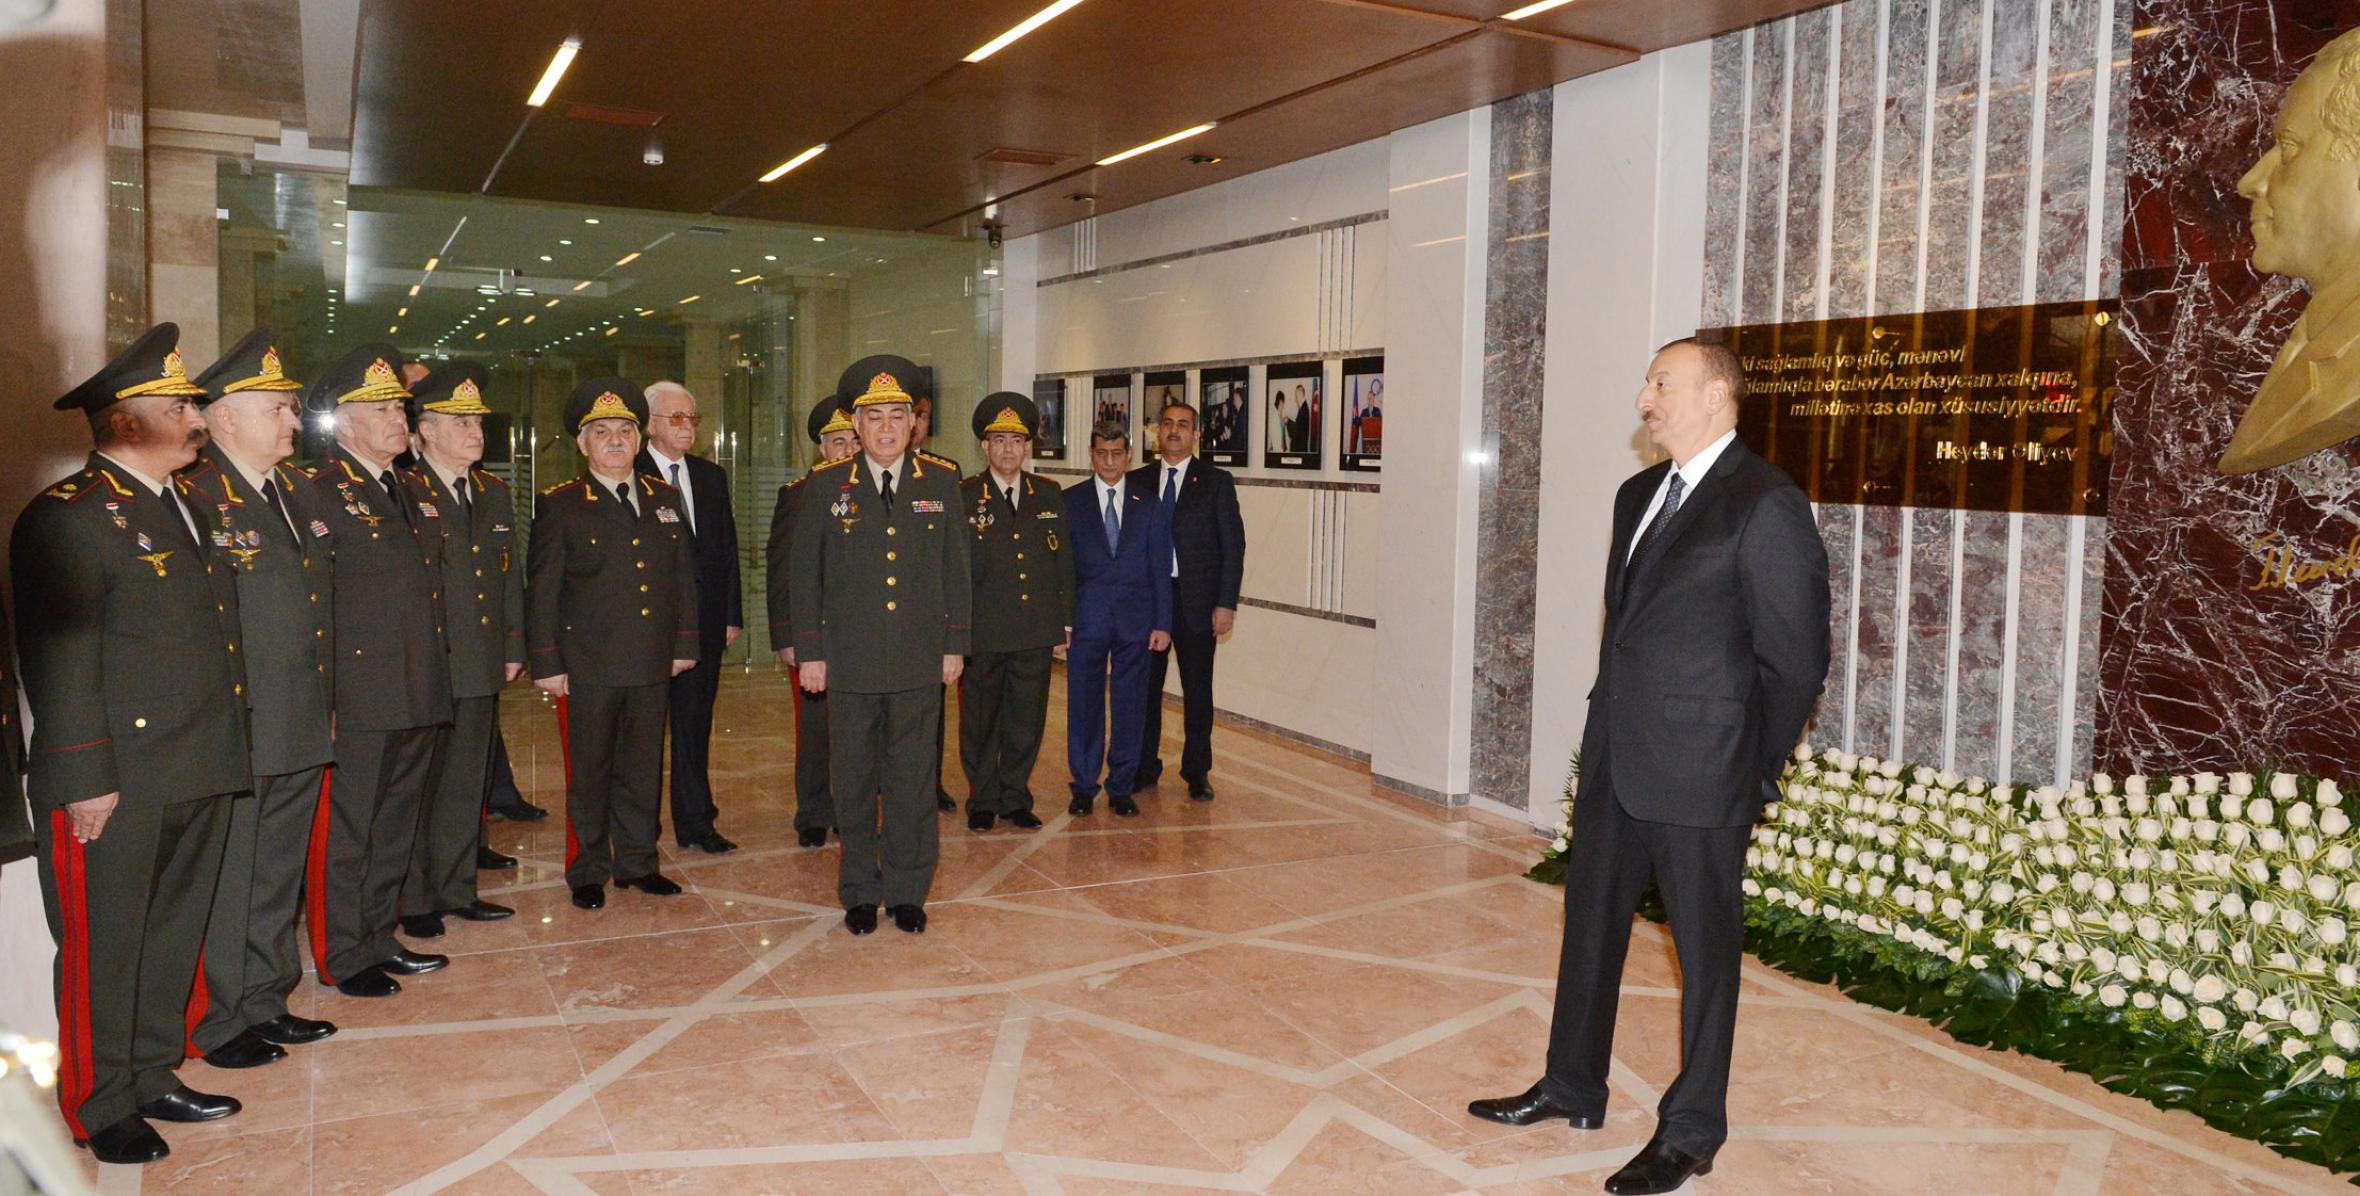 Speech by Ilham Aliyev at the opening of a sports center military camp of the Special State Protection Service